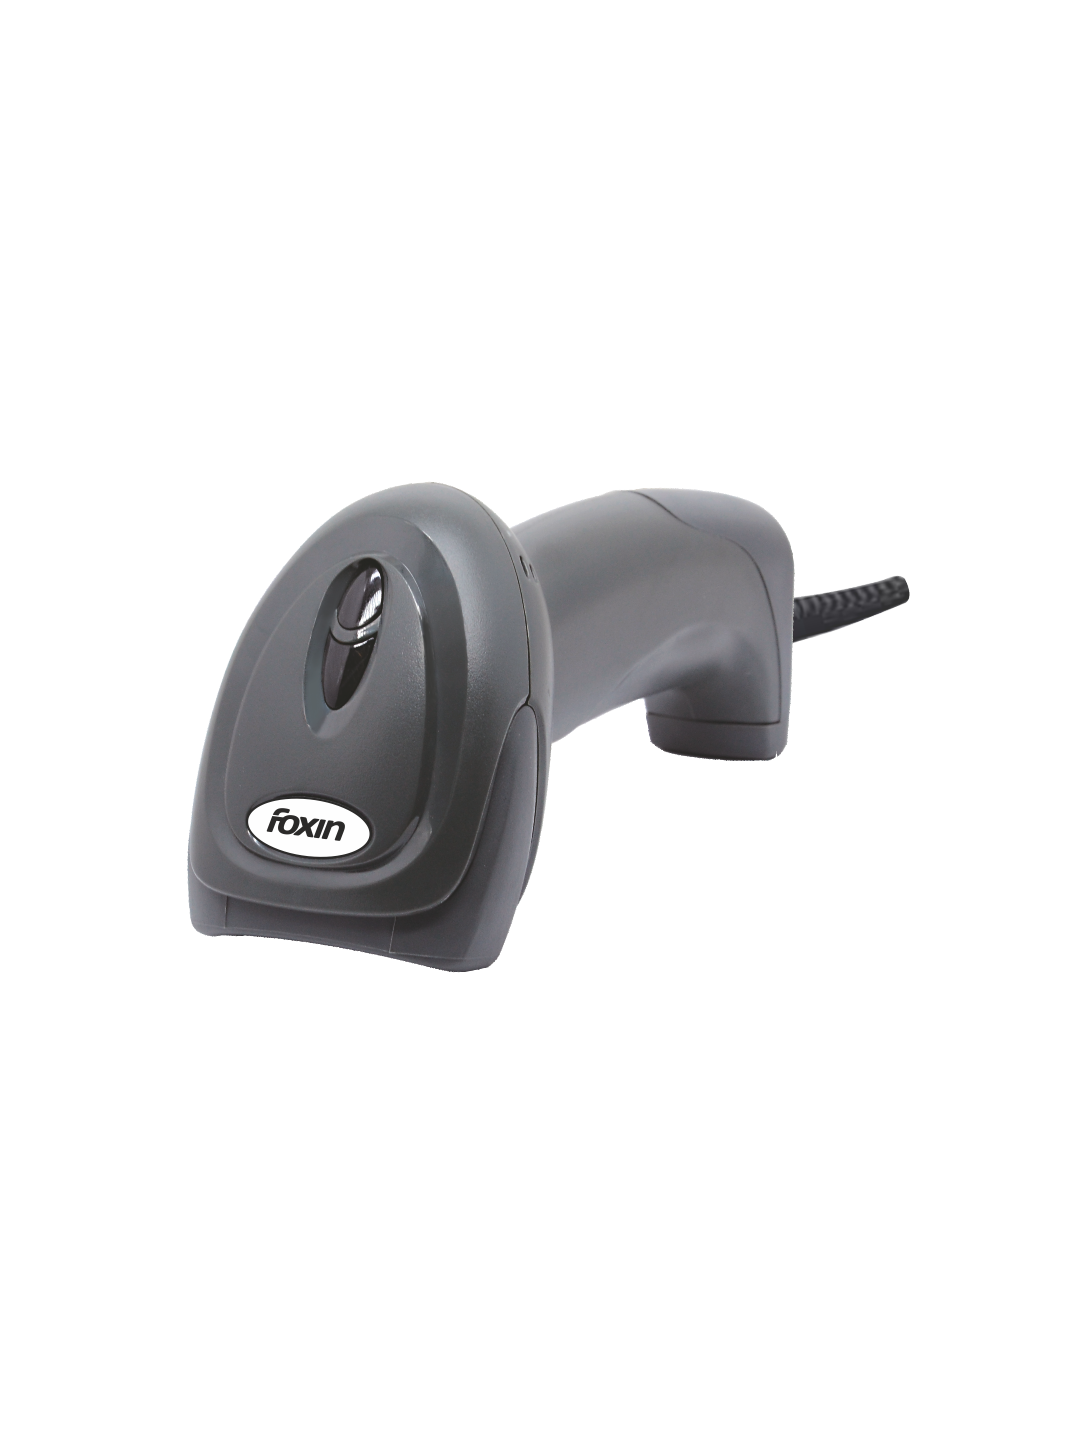 Foxin TURBO Wired Laser Barcode Scanner